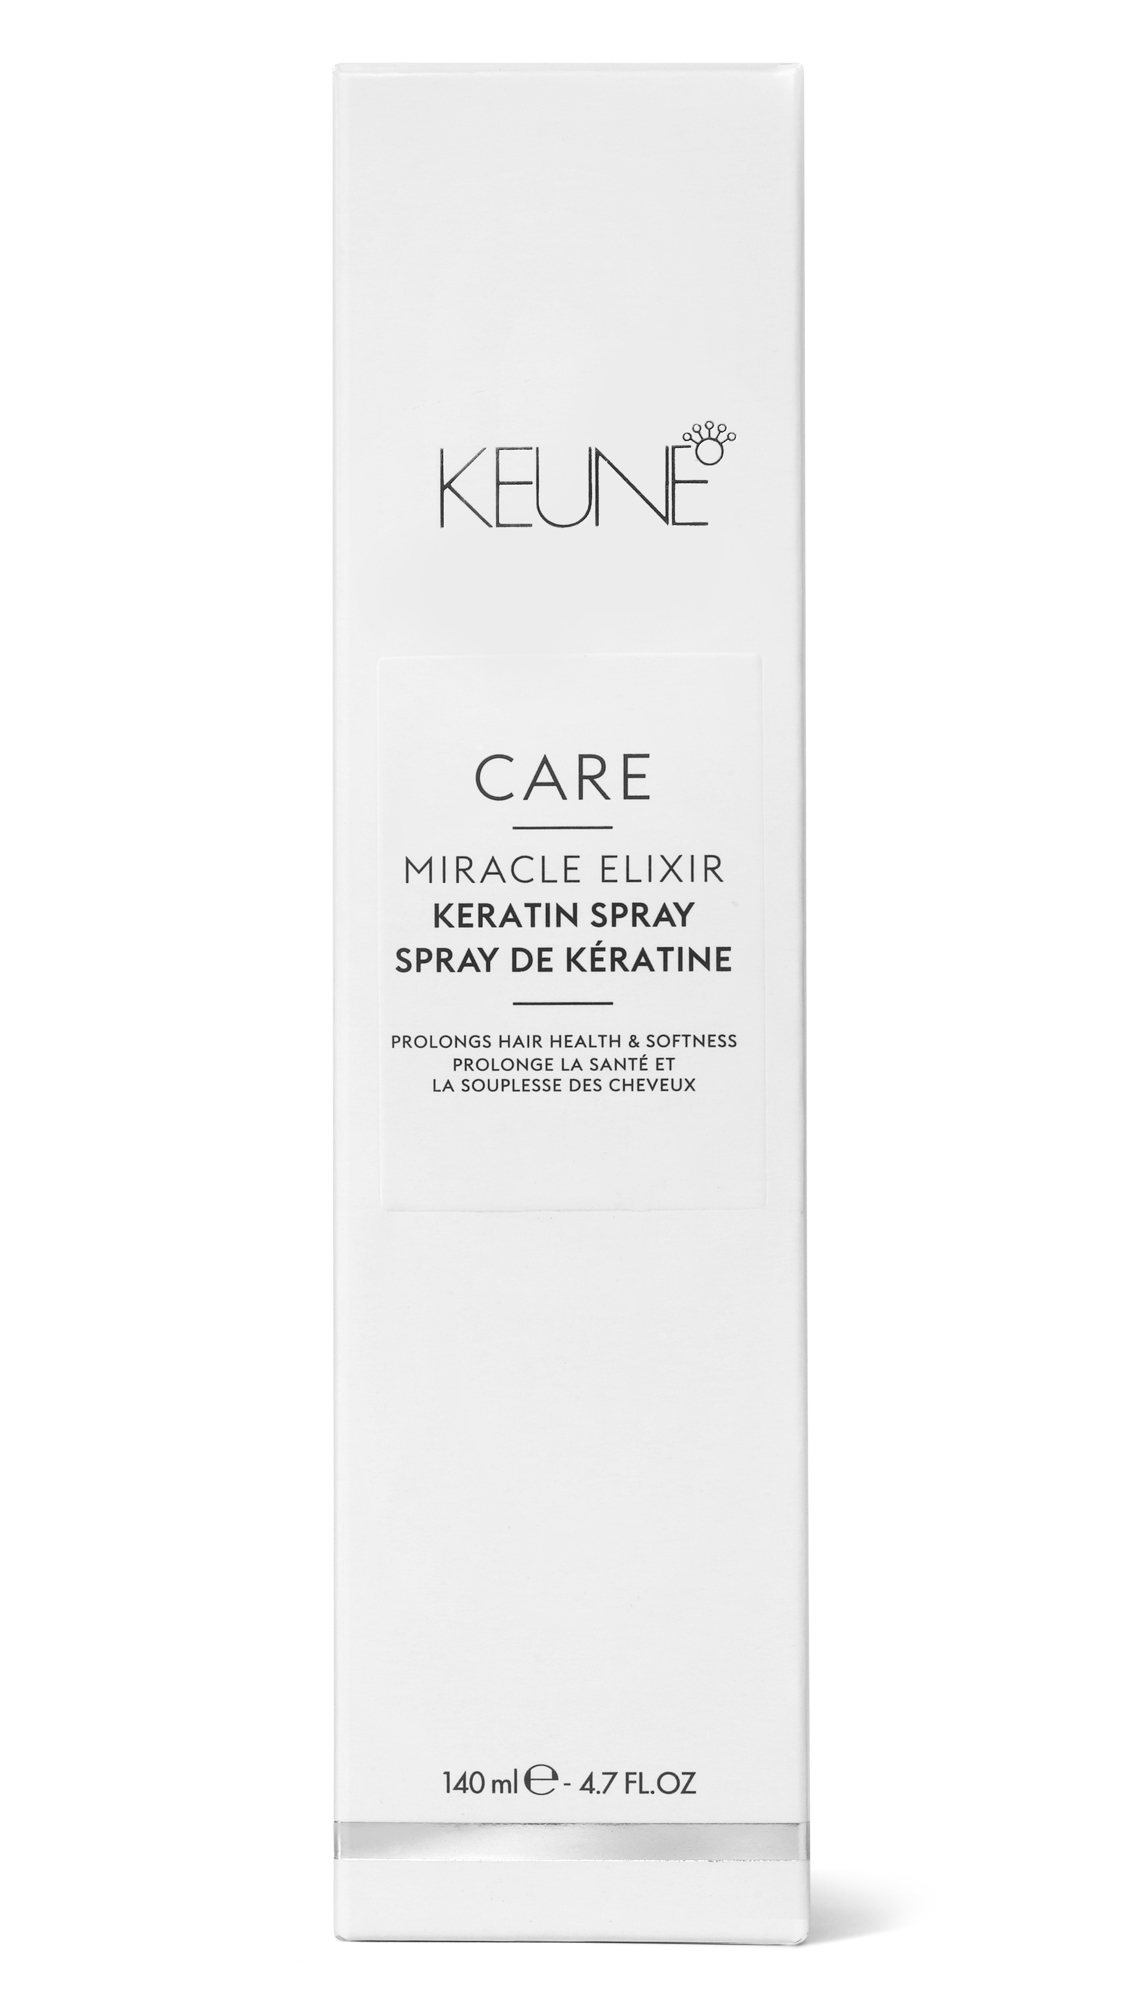 Breathe new life into your dry hair with Miracle Elixir Keratin Spray - perfect for blonde hair. Hairproduckts for amaizing hair style on keune.ch.